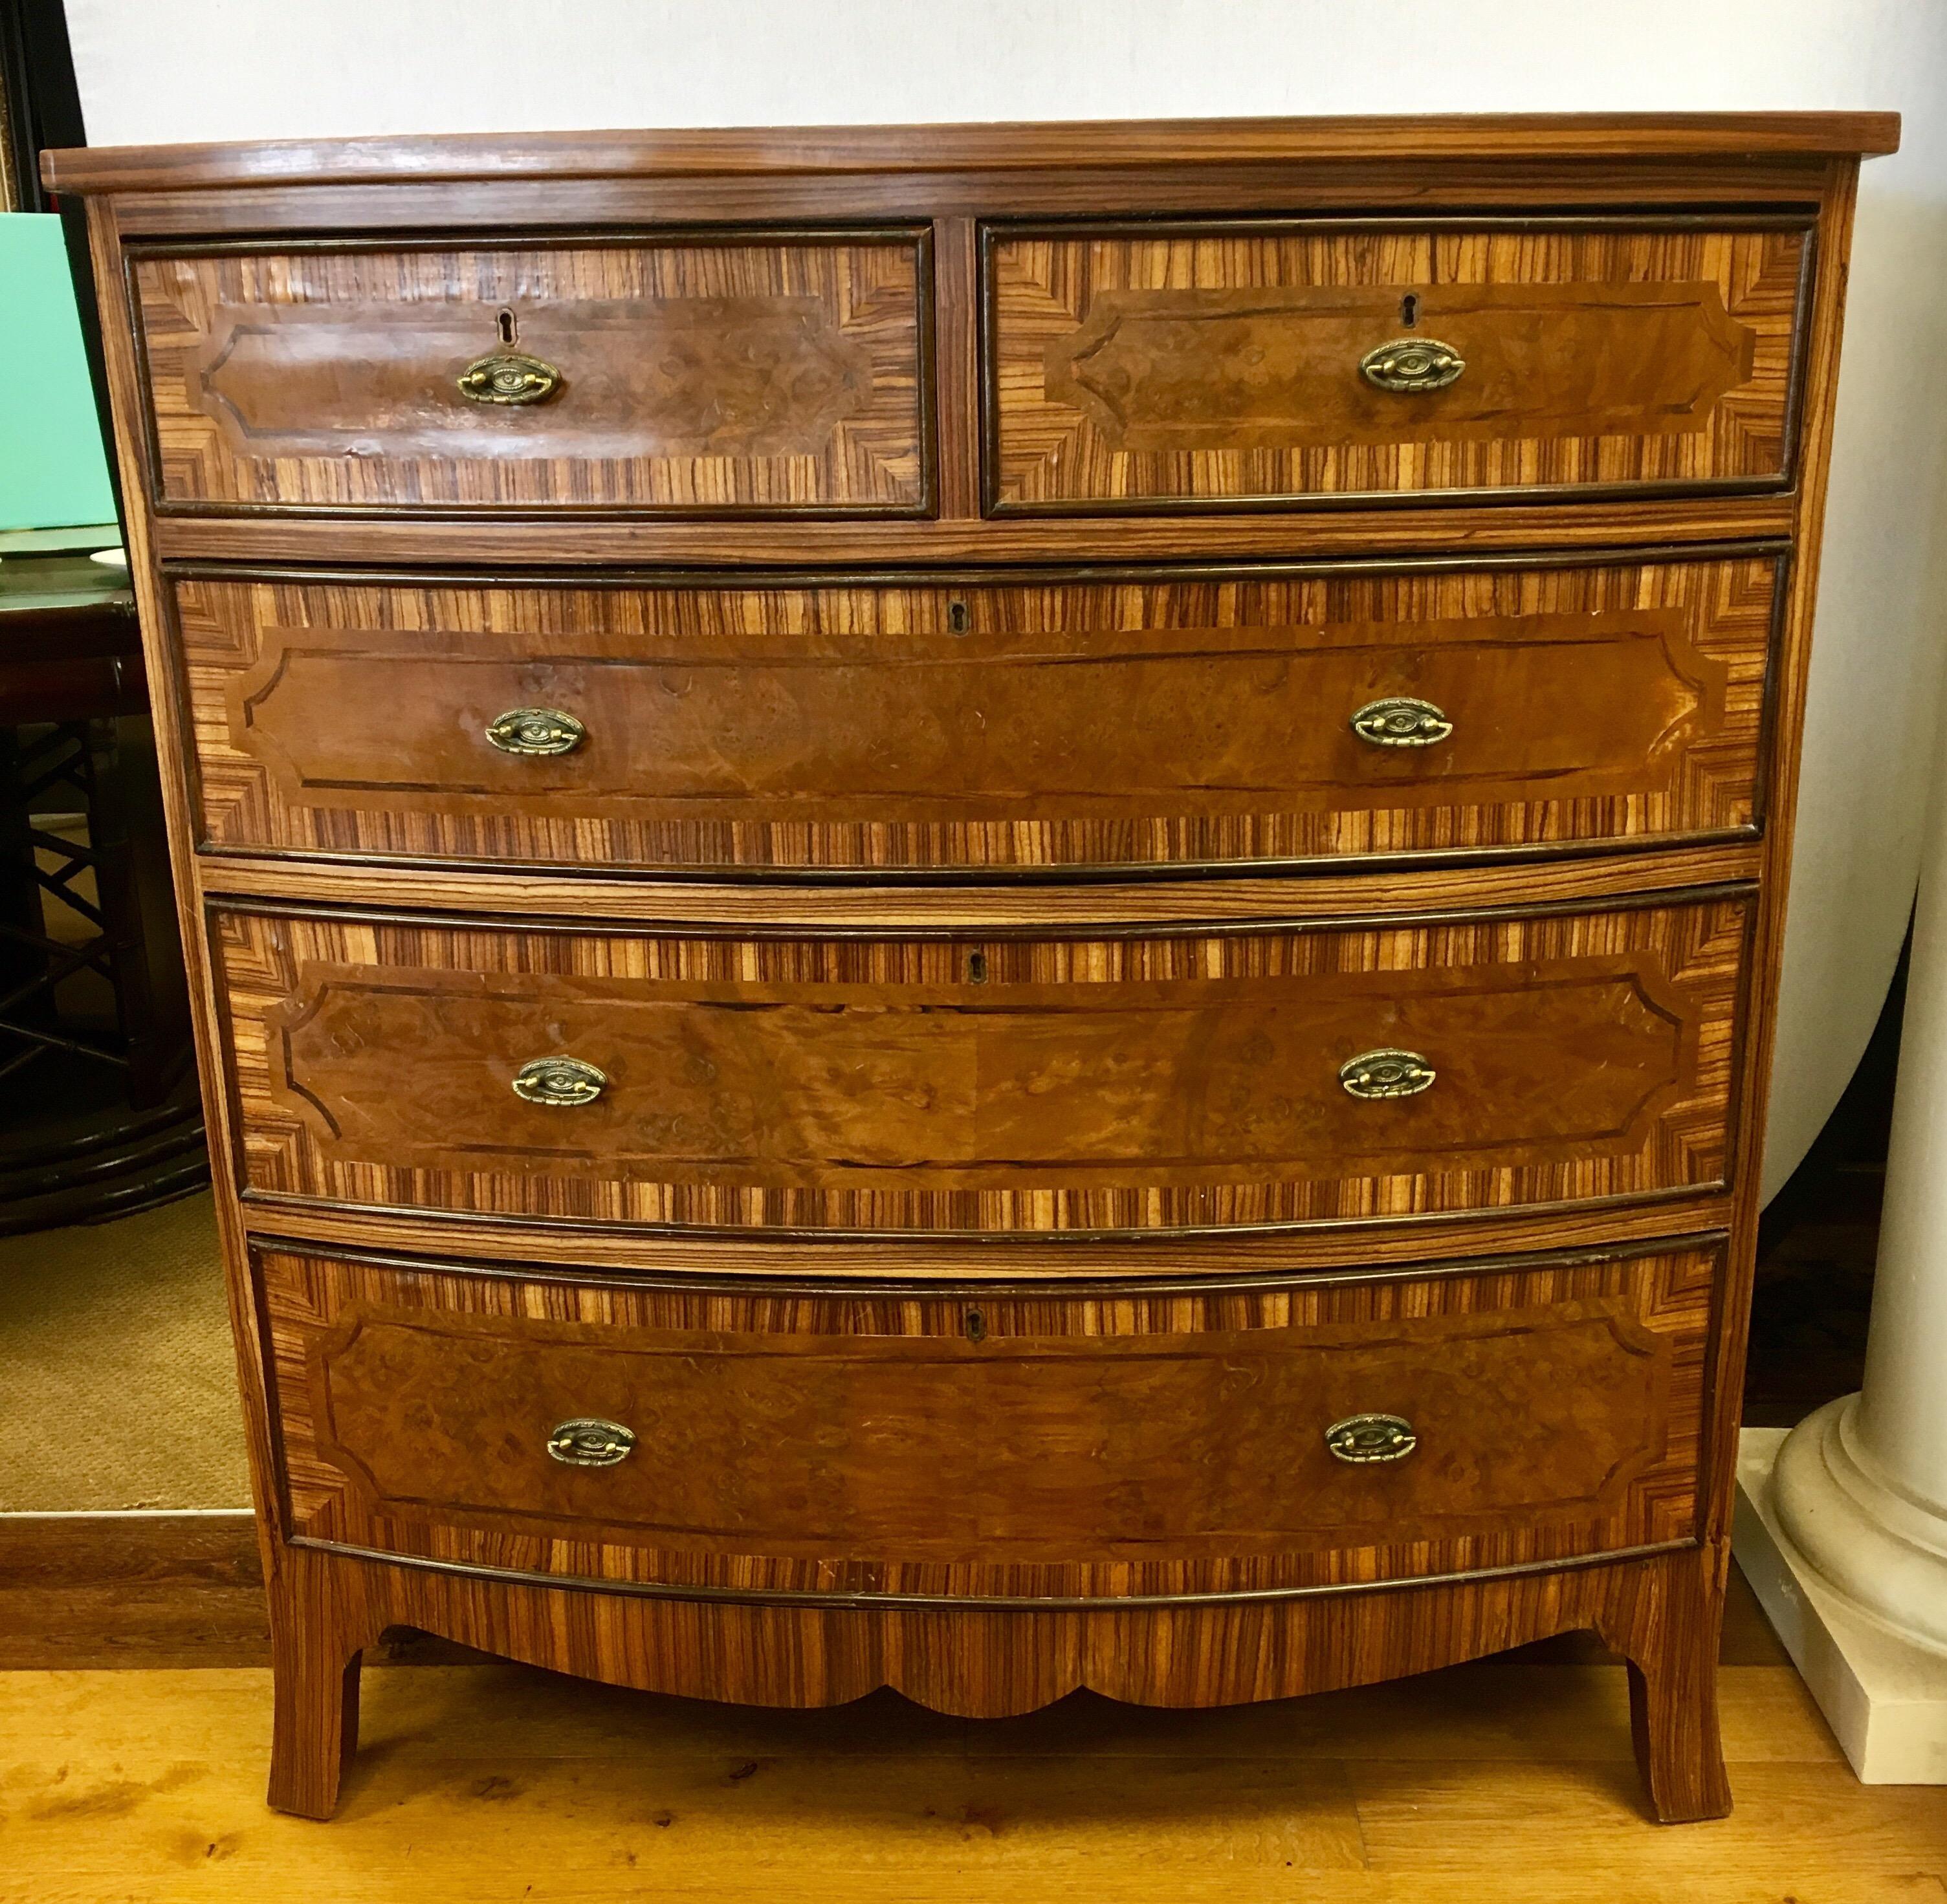 Magnificent and rare tall chest of drawers is handcrafted in a combination of two woods, Macassar ebony and burl wood. It has five drawers with original hardware and is slightly bowed in shape. The top and drawers are framed with Macassar ebony